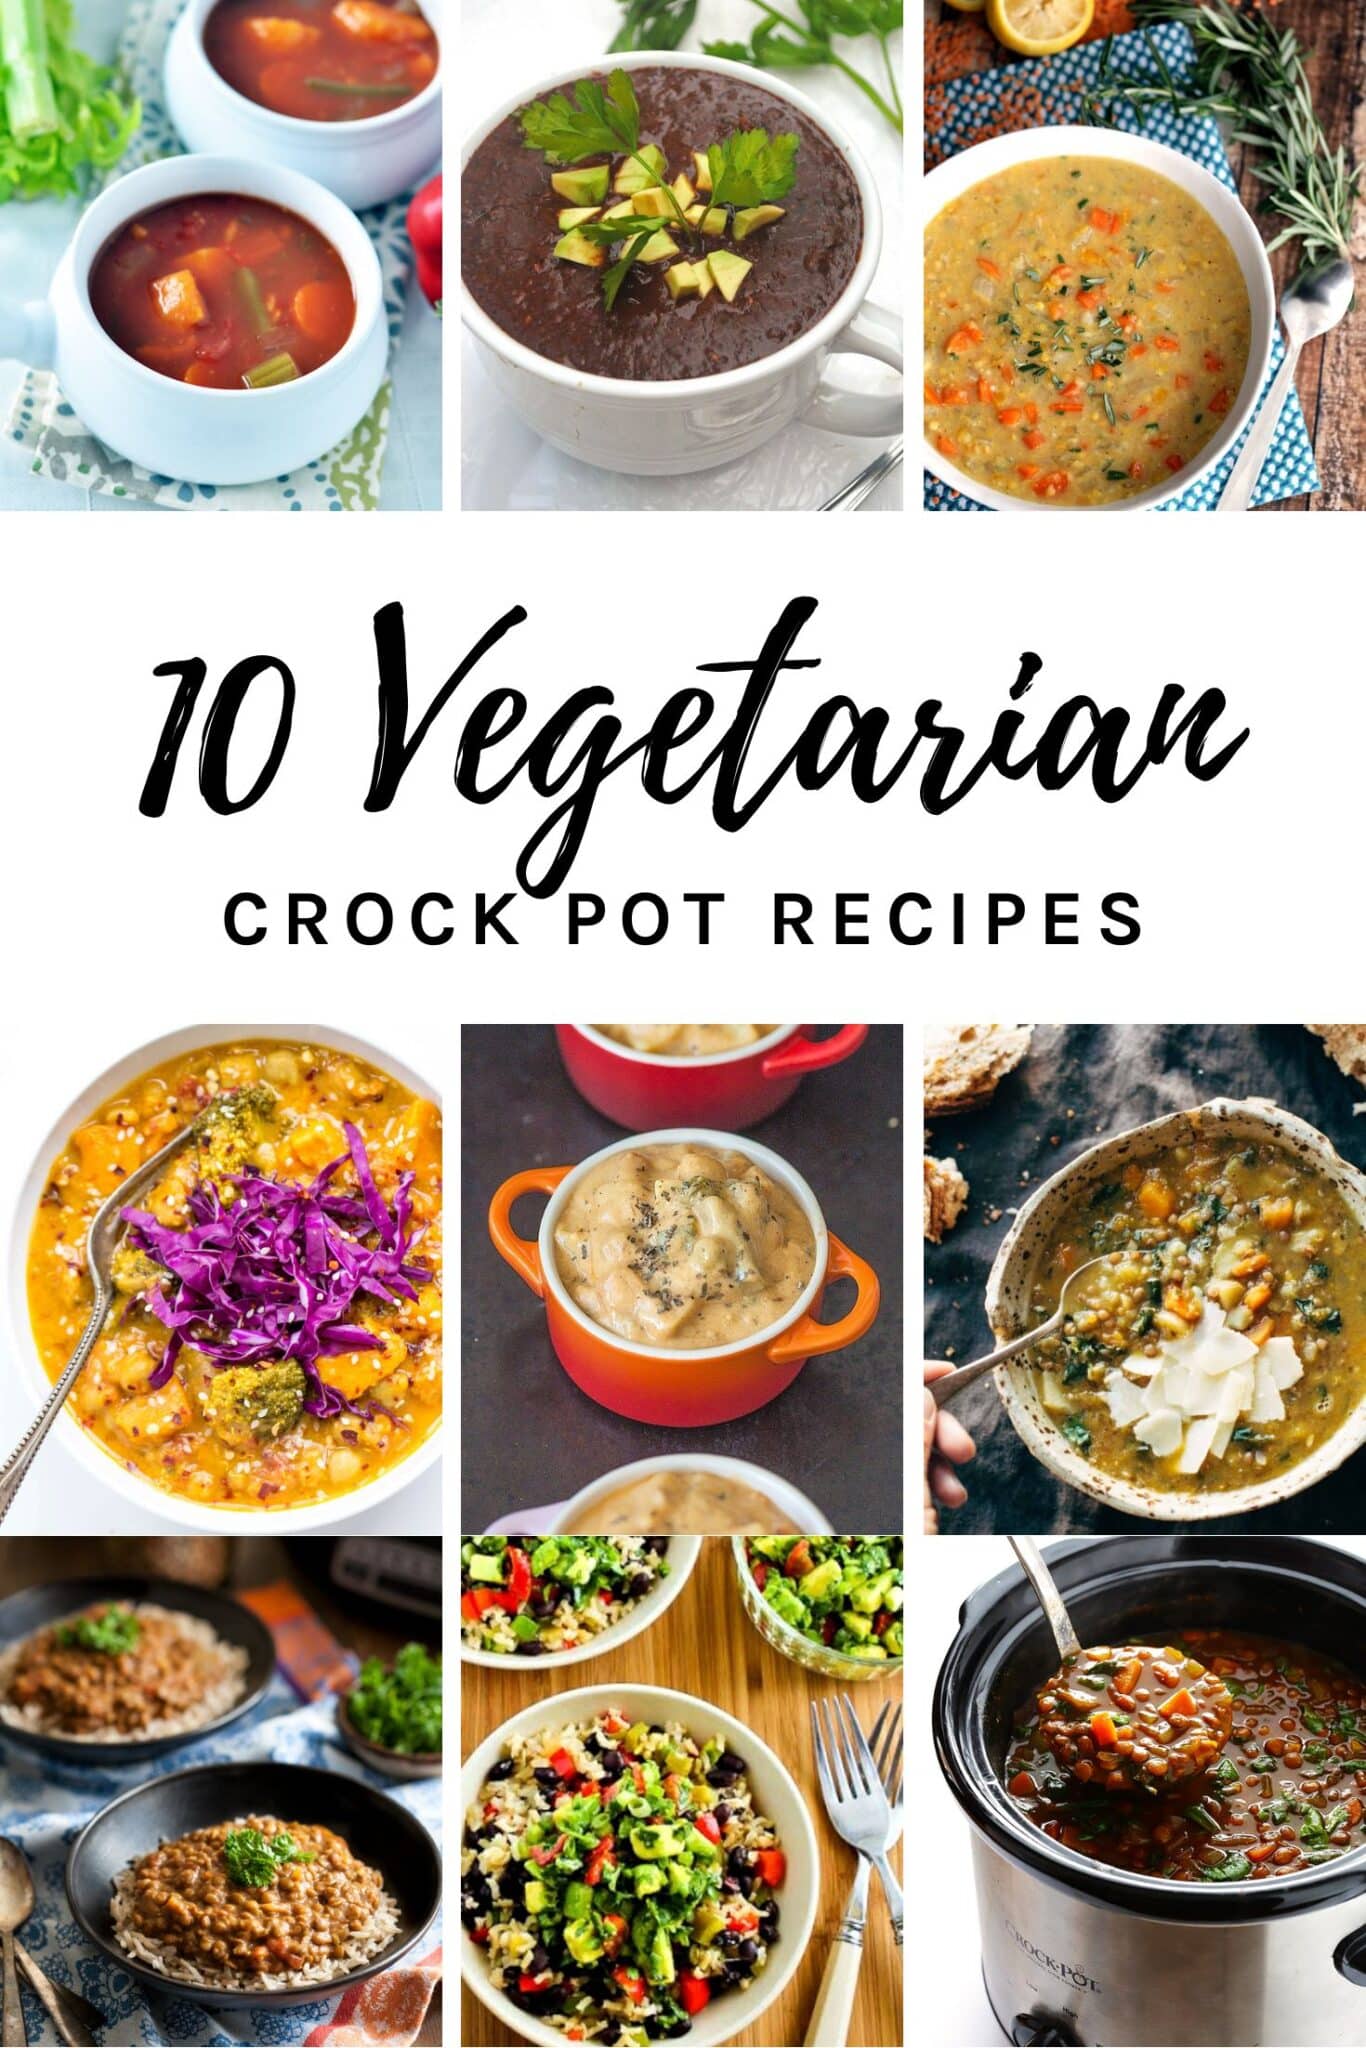 Vegetarian crock pot recipes with nice of the recipes in the photo